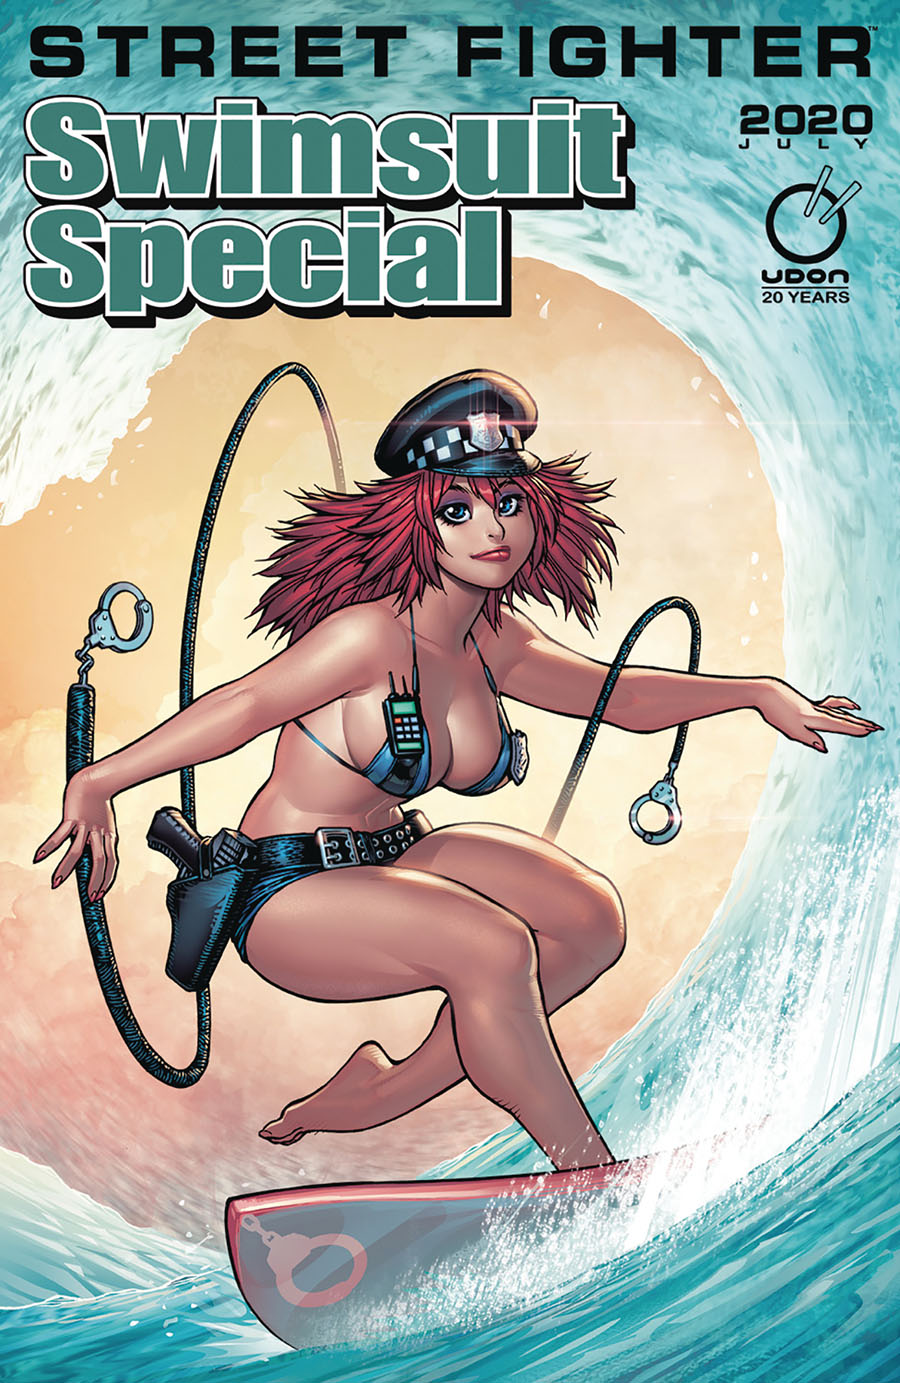 Street Fighter Swimsuit Special #2020 (2020)